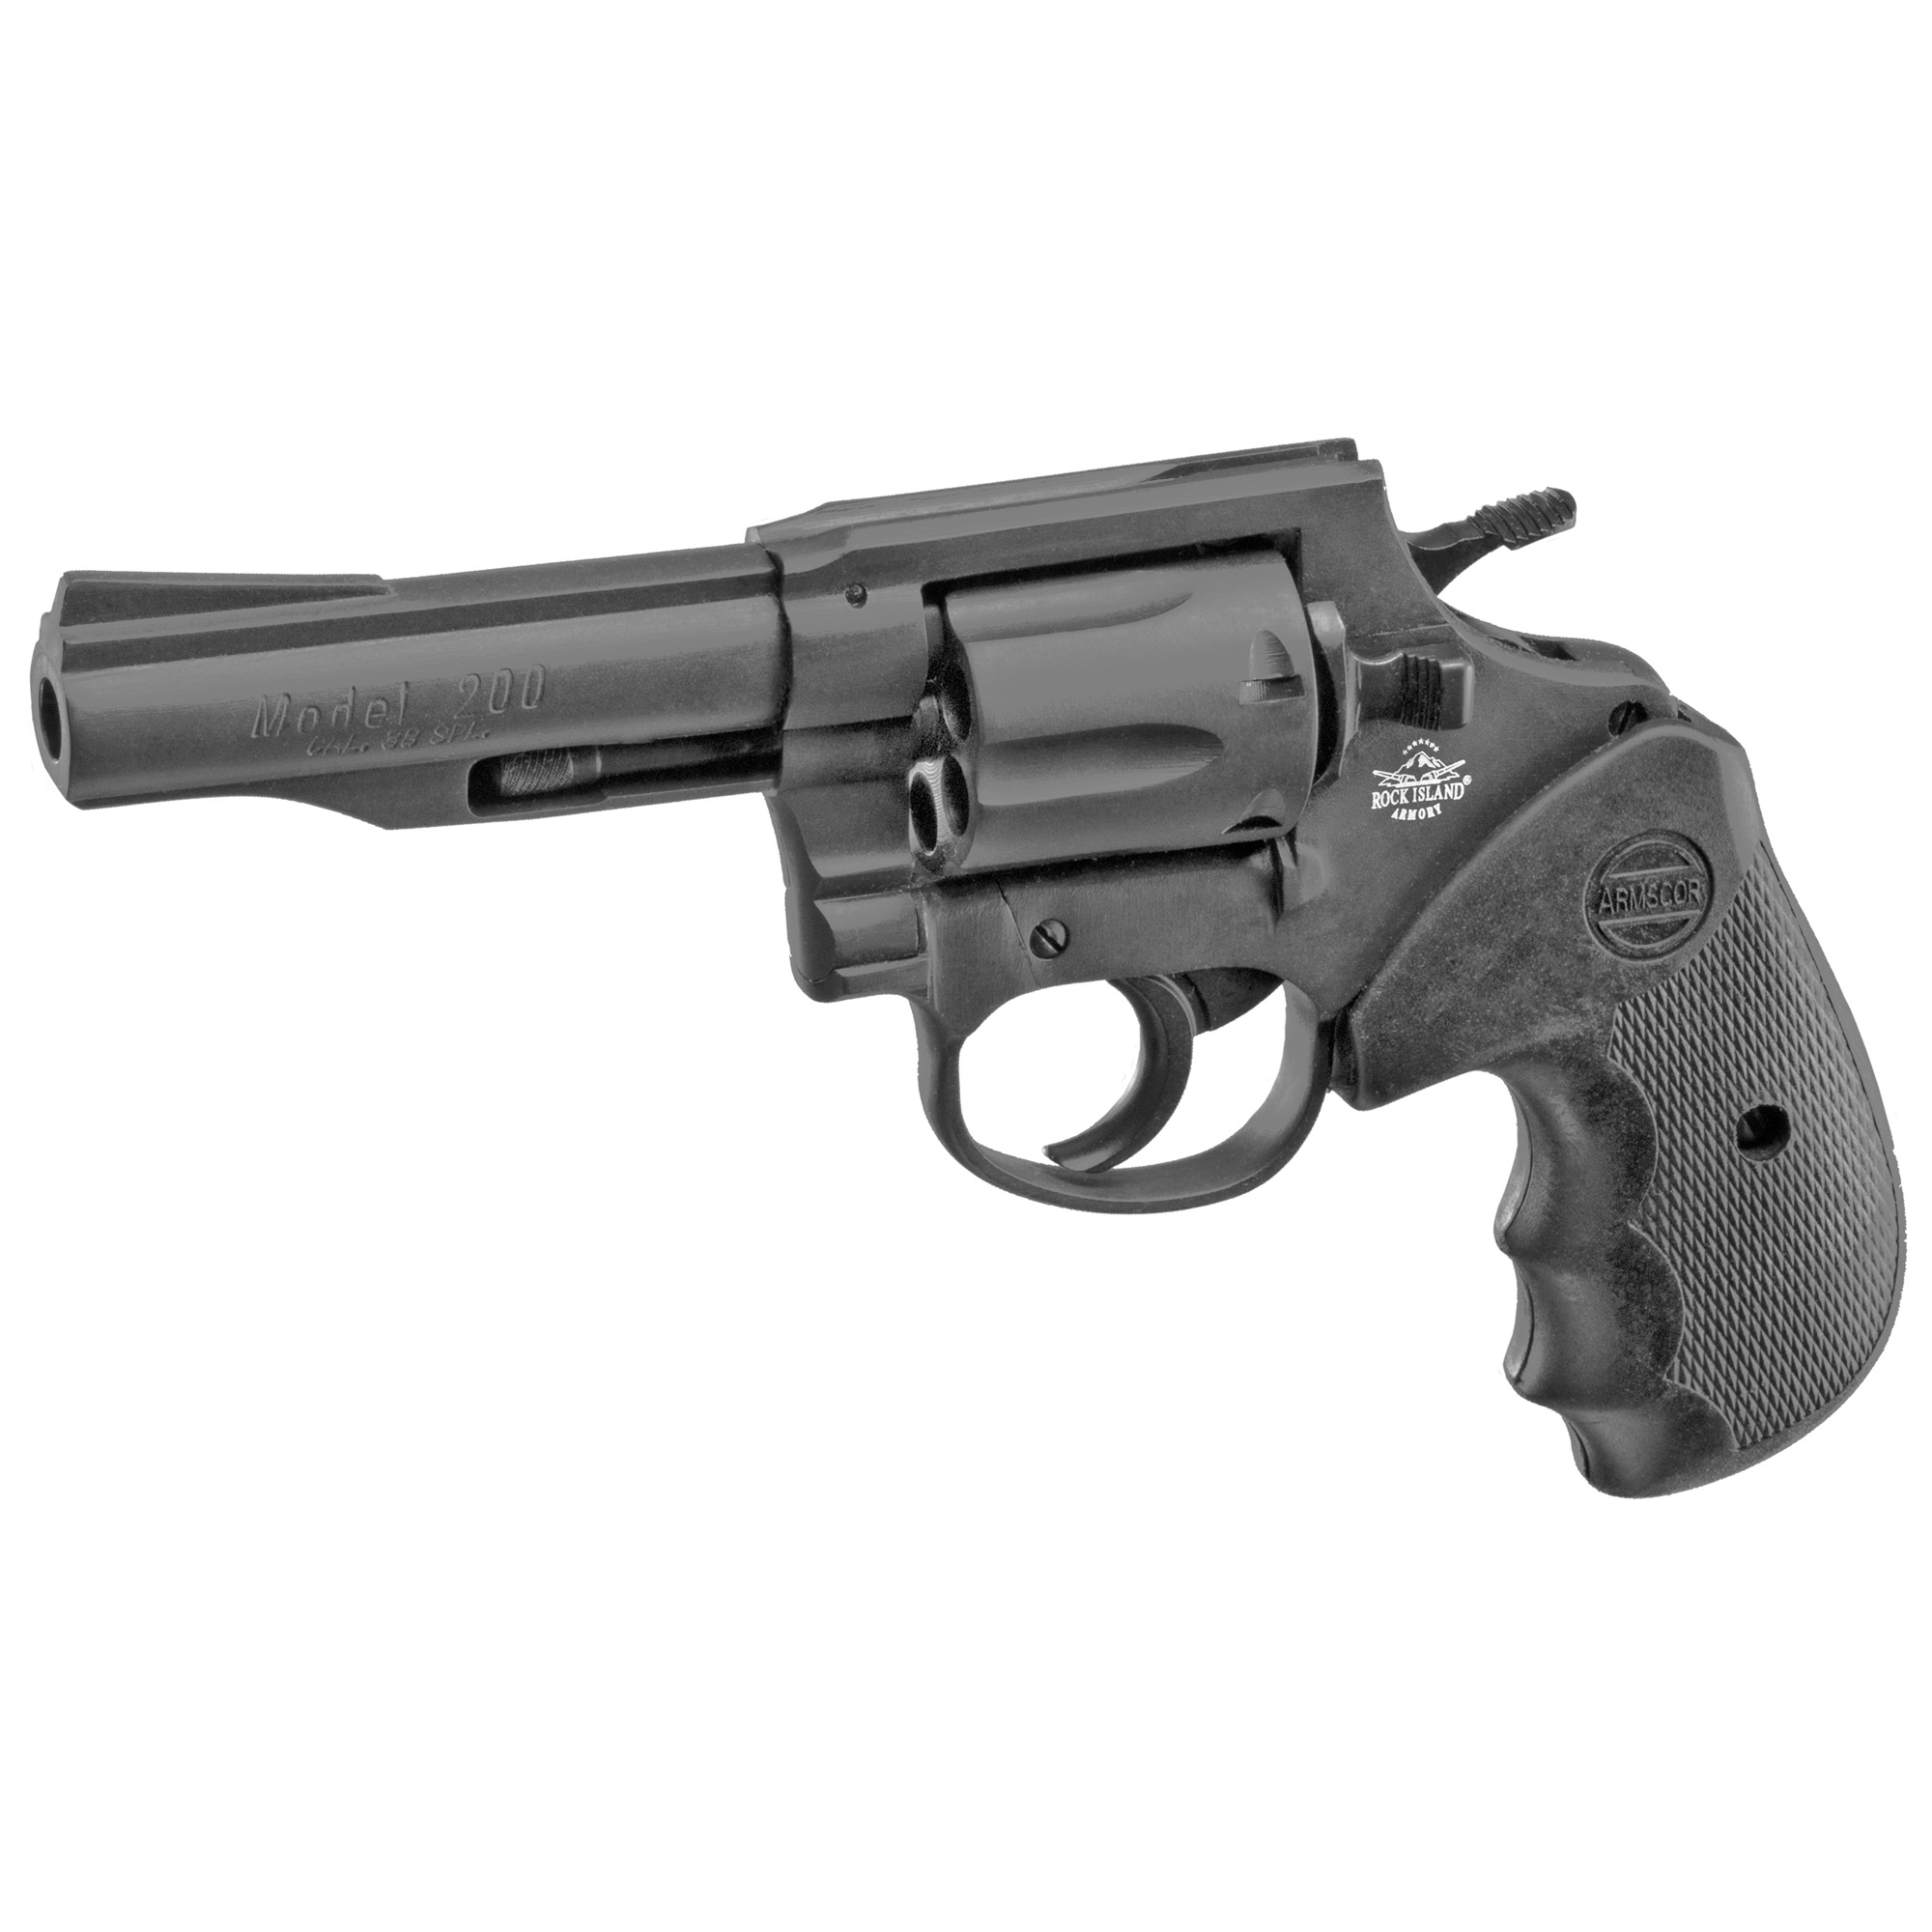 Armscor, M200, Revolver, Double Action/Single Action, 38 Special, 4" Barrel, Steel, Parkerized Finish, Black, Polymer Grip, Fixed Sights, 6 Rounds